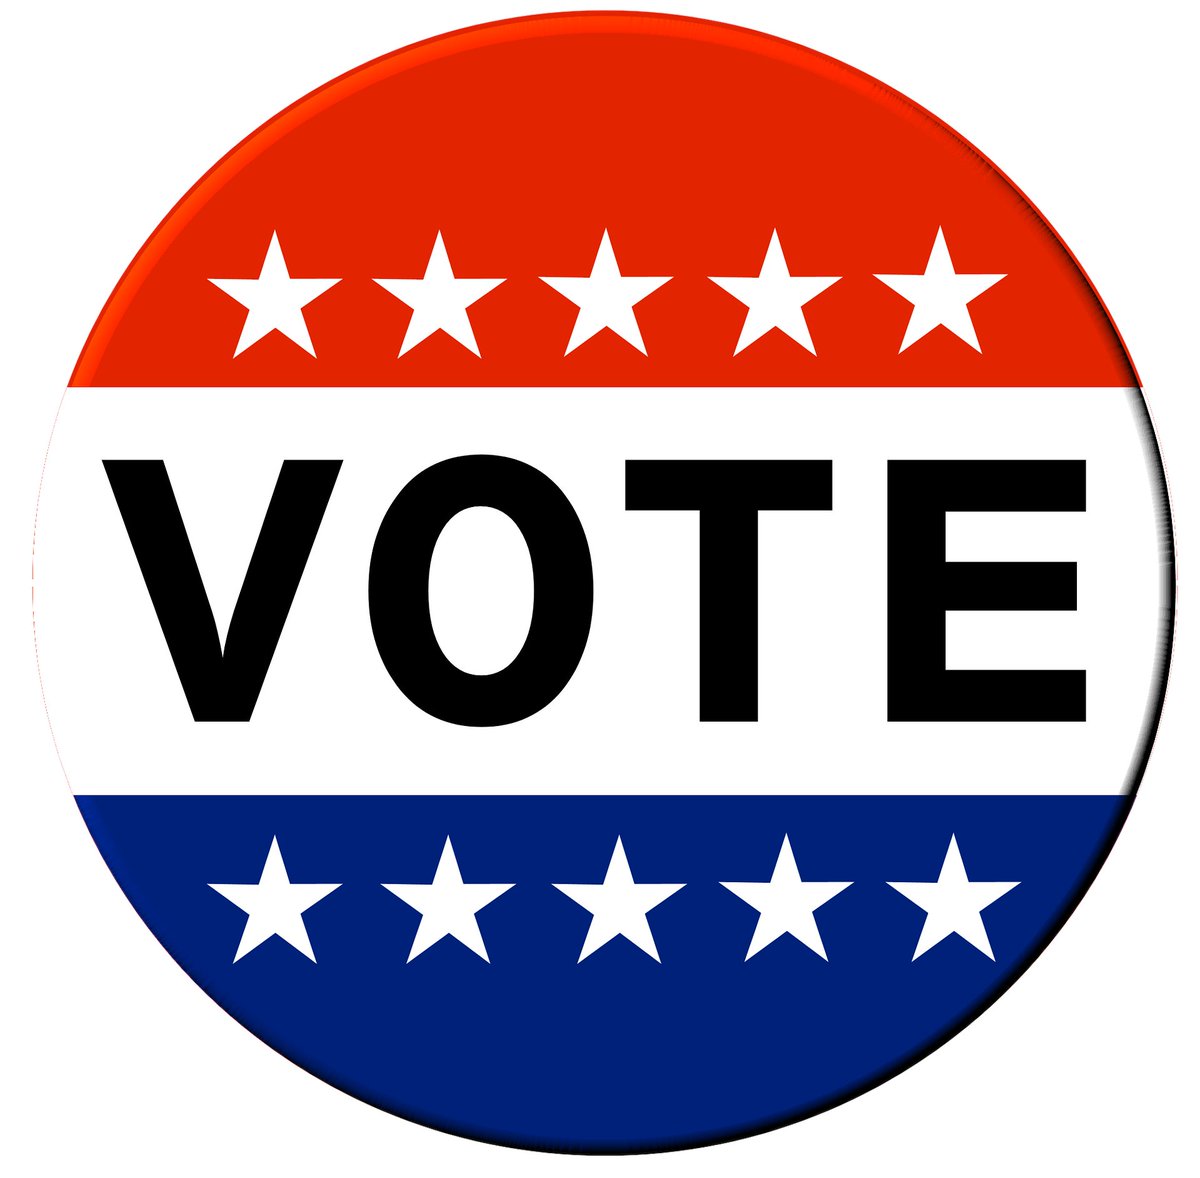 The Presidential Primary Election is today, Tuesday, February 27. Voting today, on Election Day is at the polls 7 am - 8 pm. Bring a photo ID to the polls. For complete election information, visit cityofholland.com/167/Elections